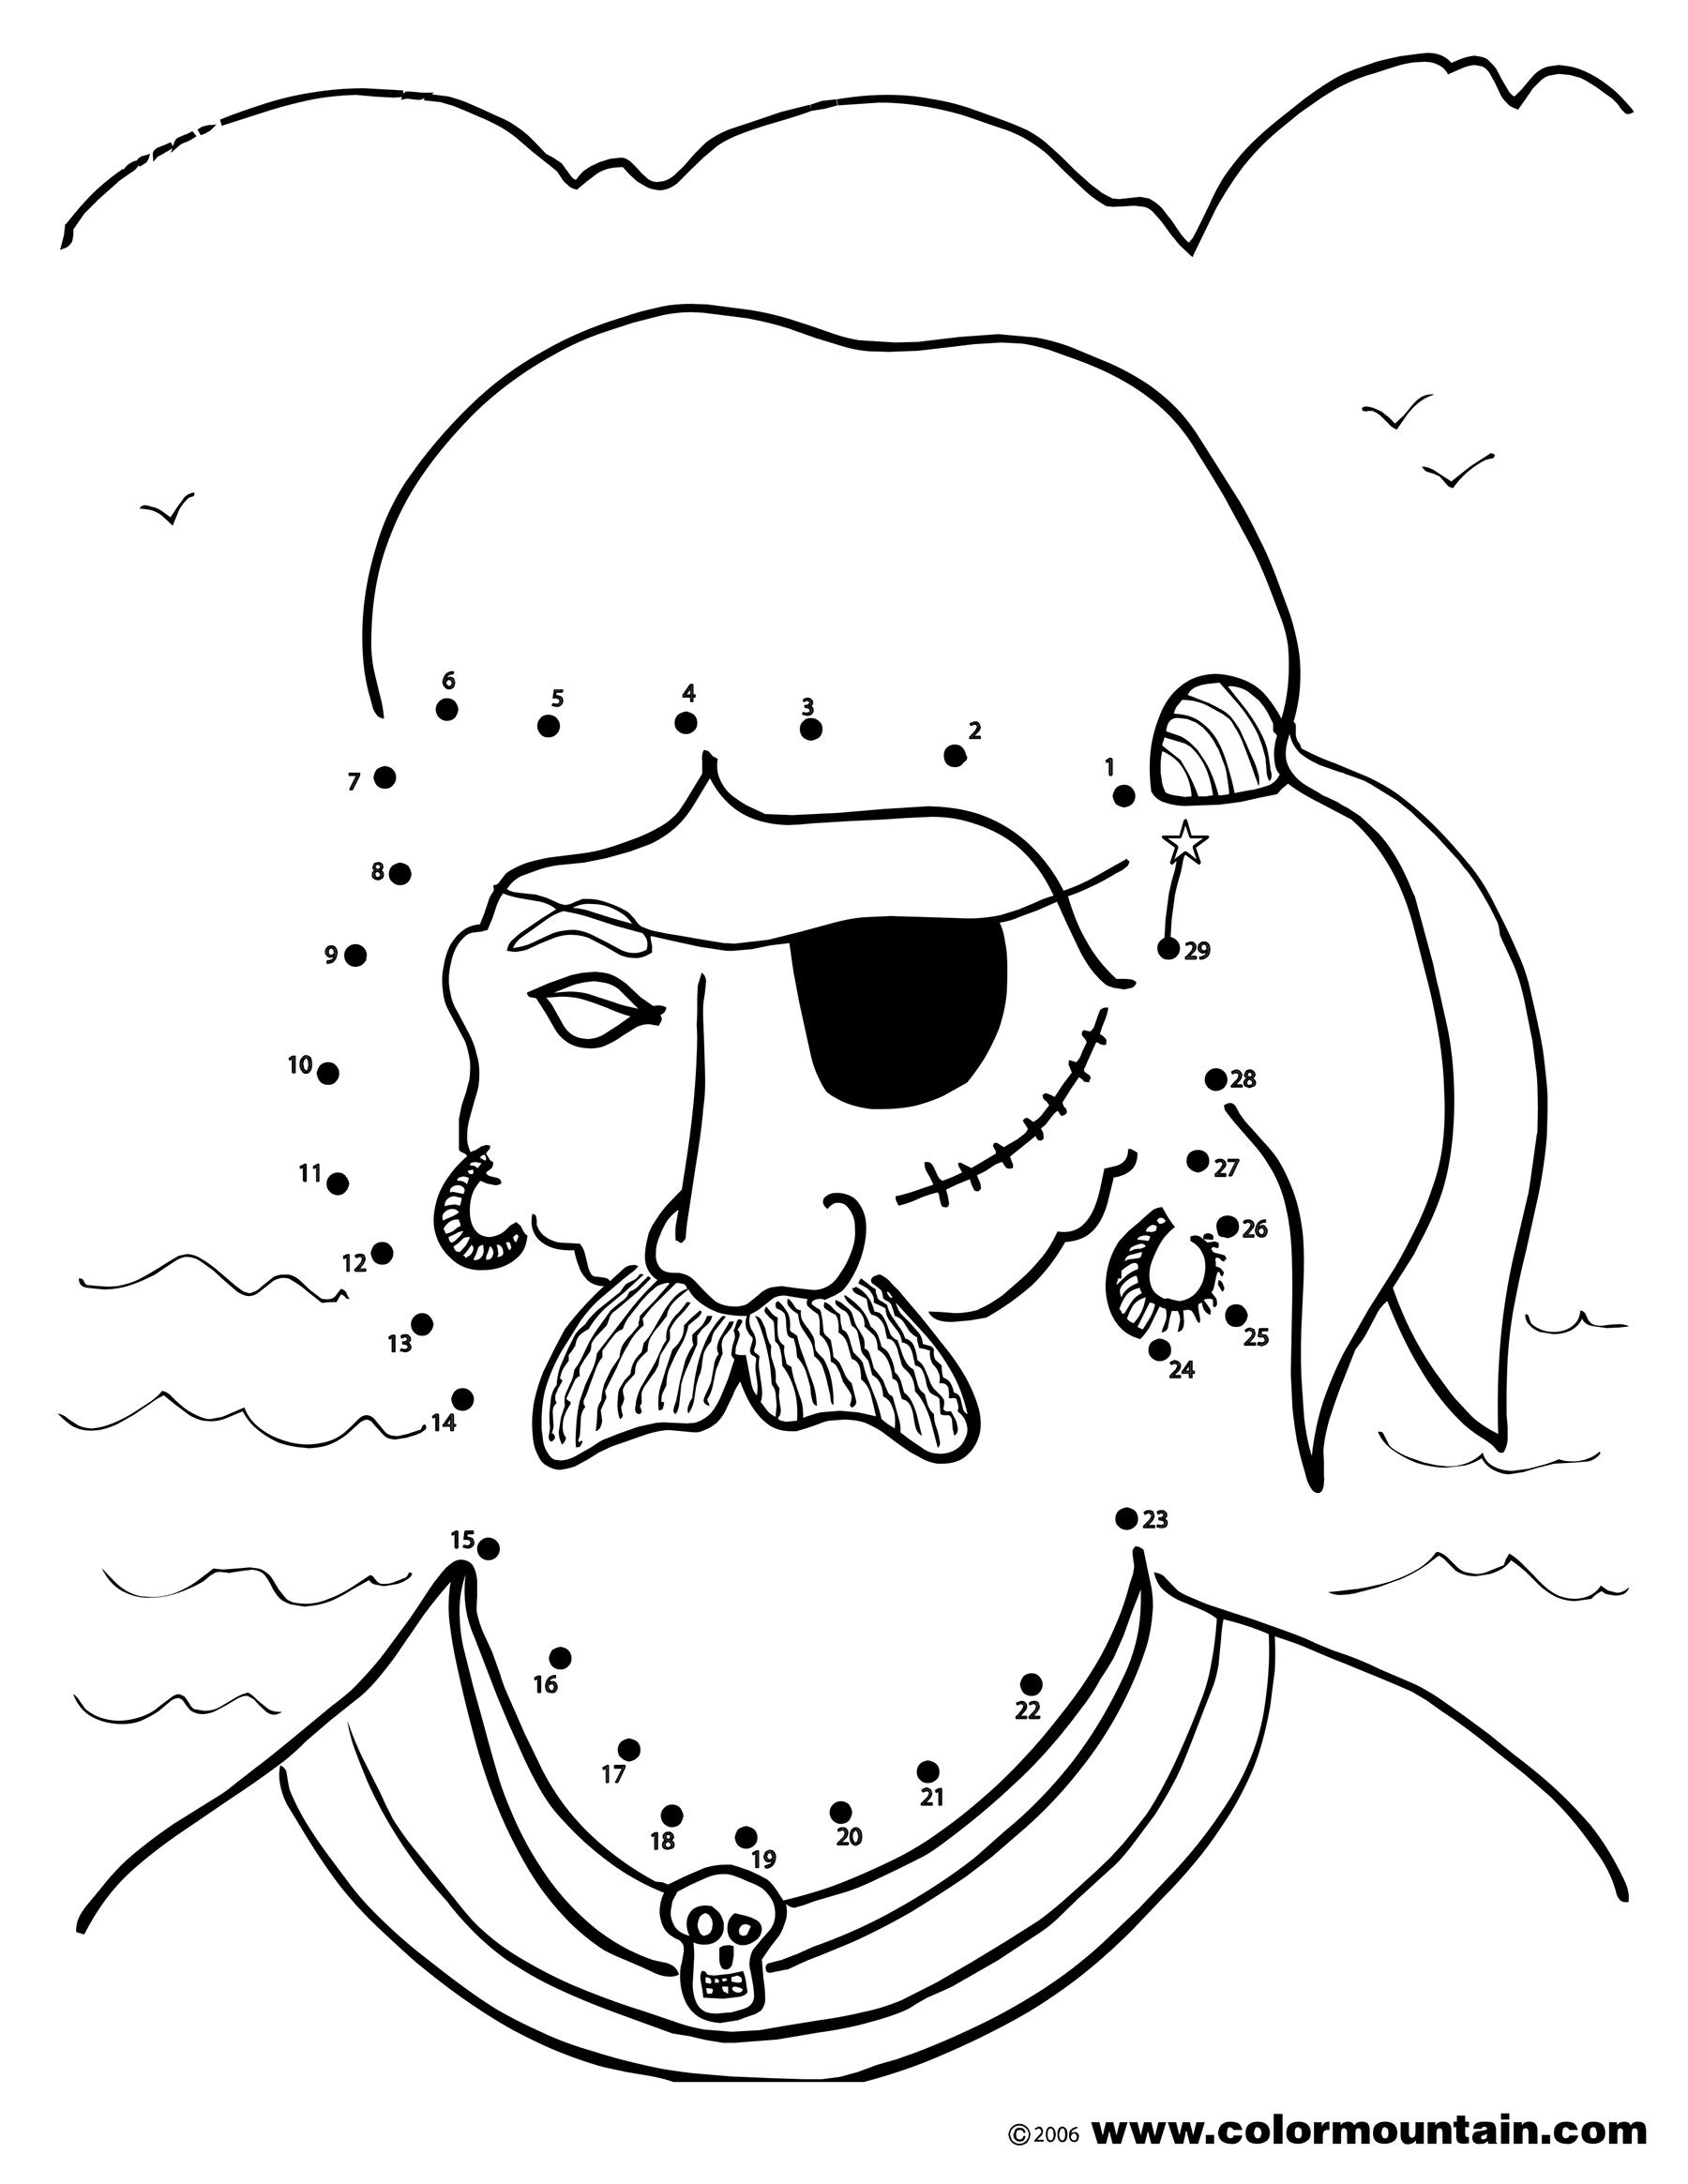 Pirate Dot to Dot Coloring Page - Create A Printout Or Activity